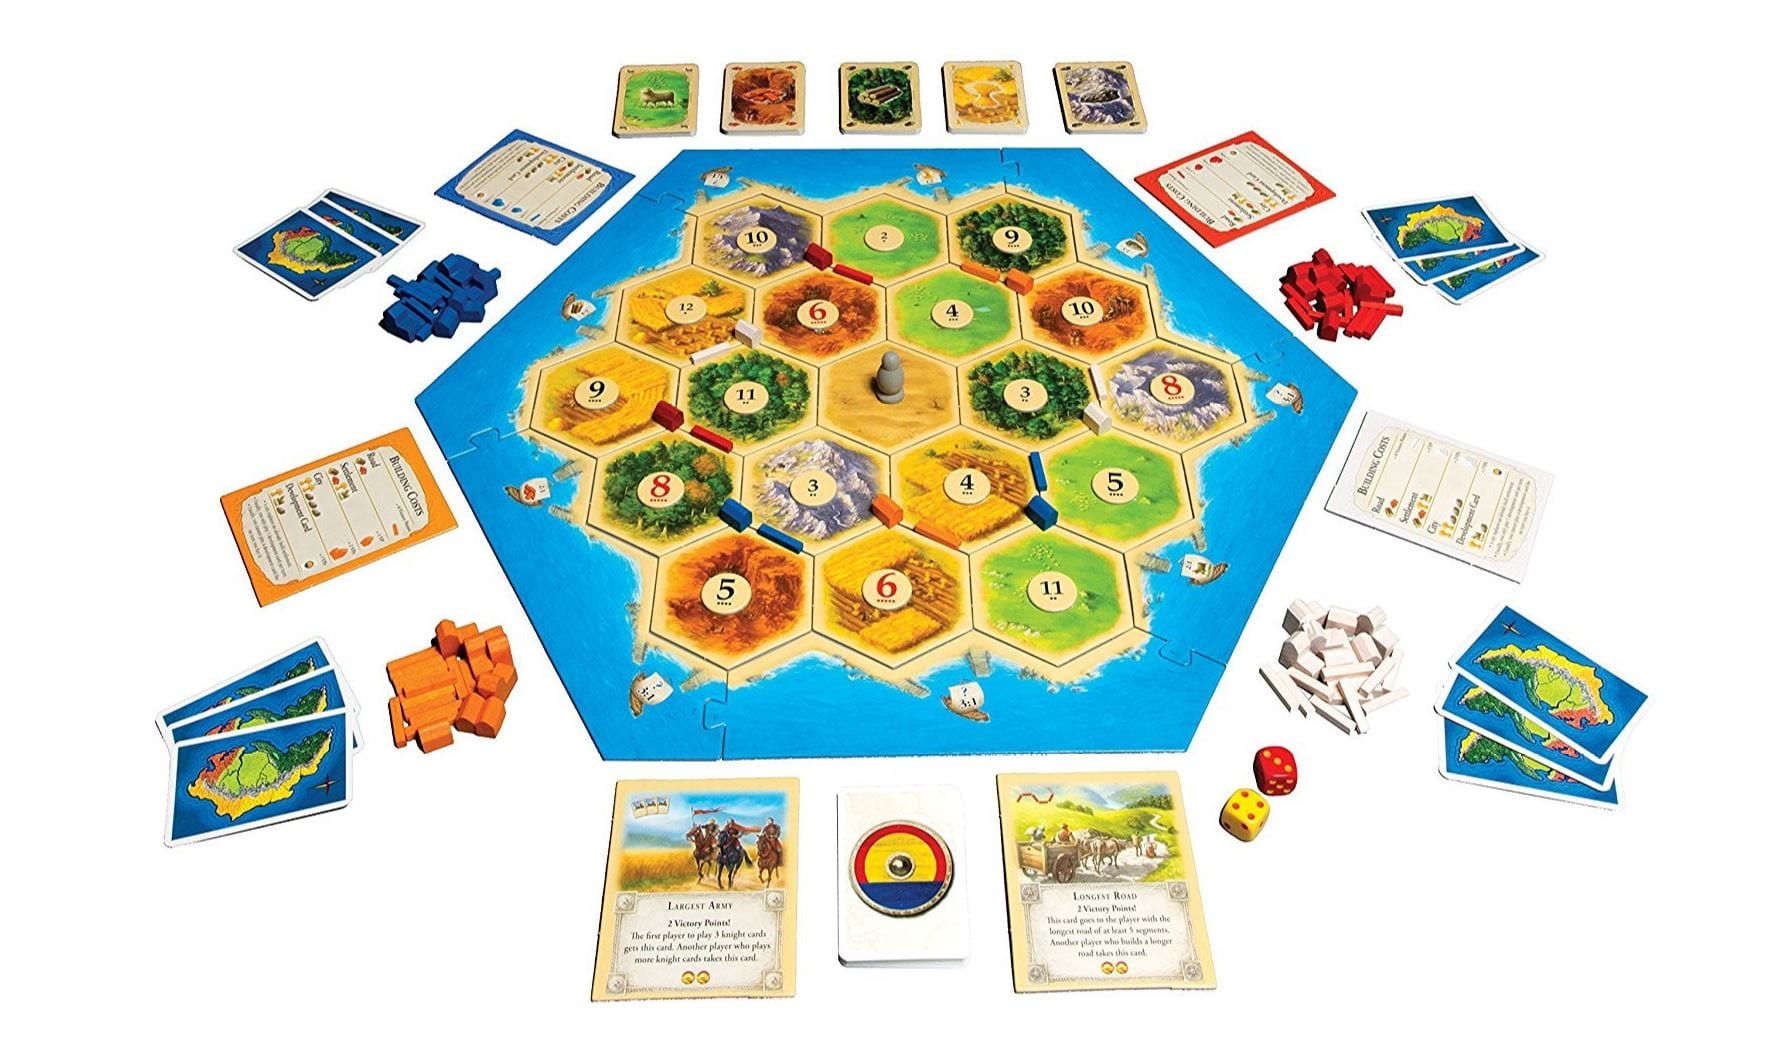 What are the Benefits of Board Games NZ